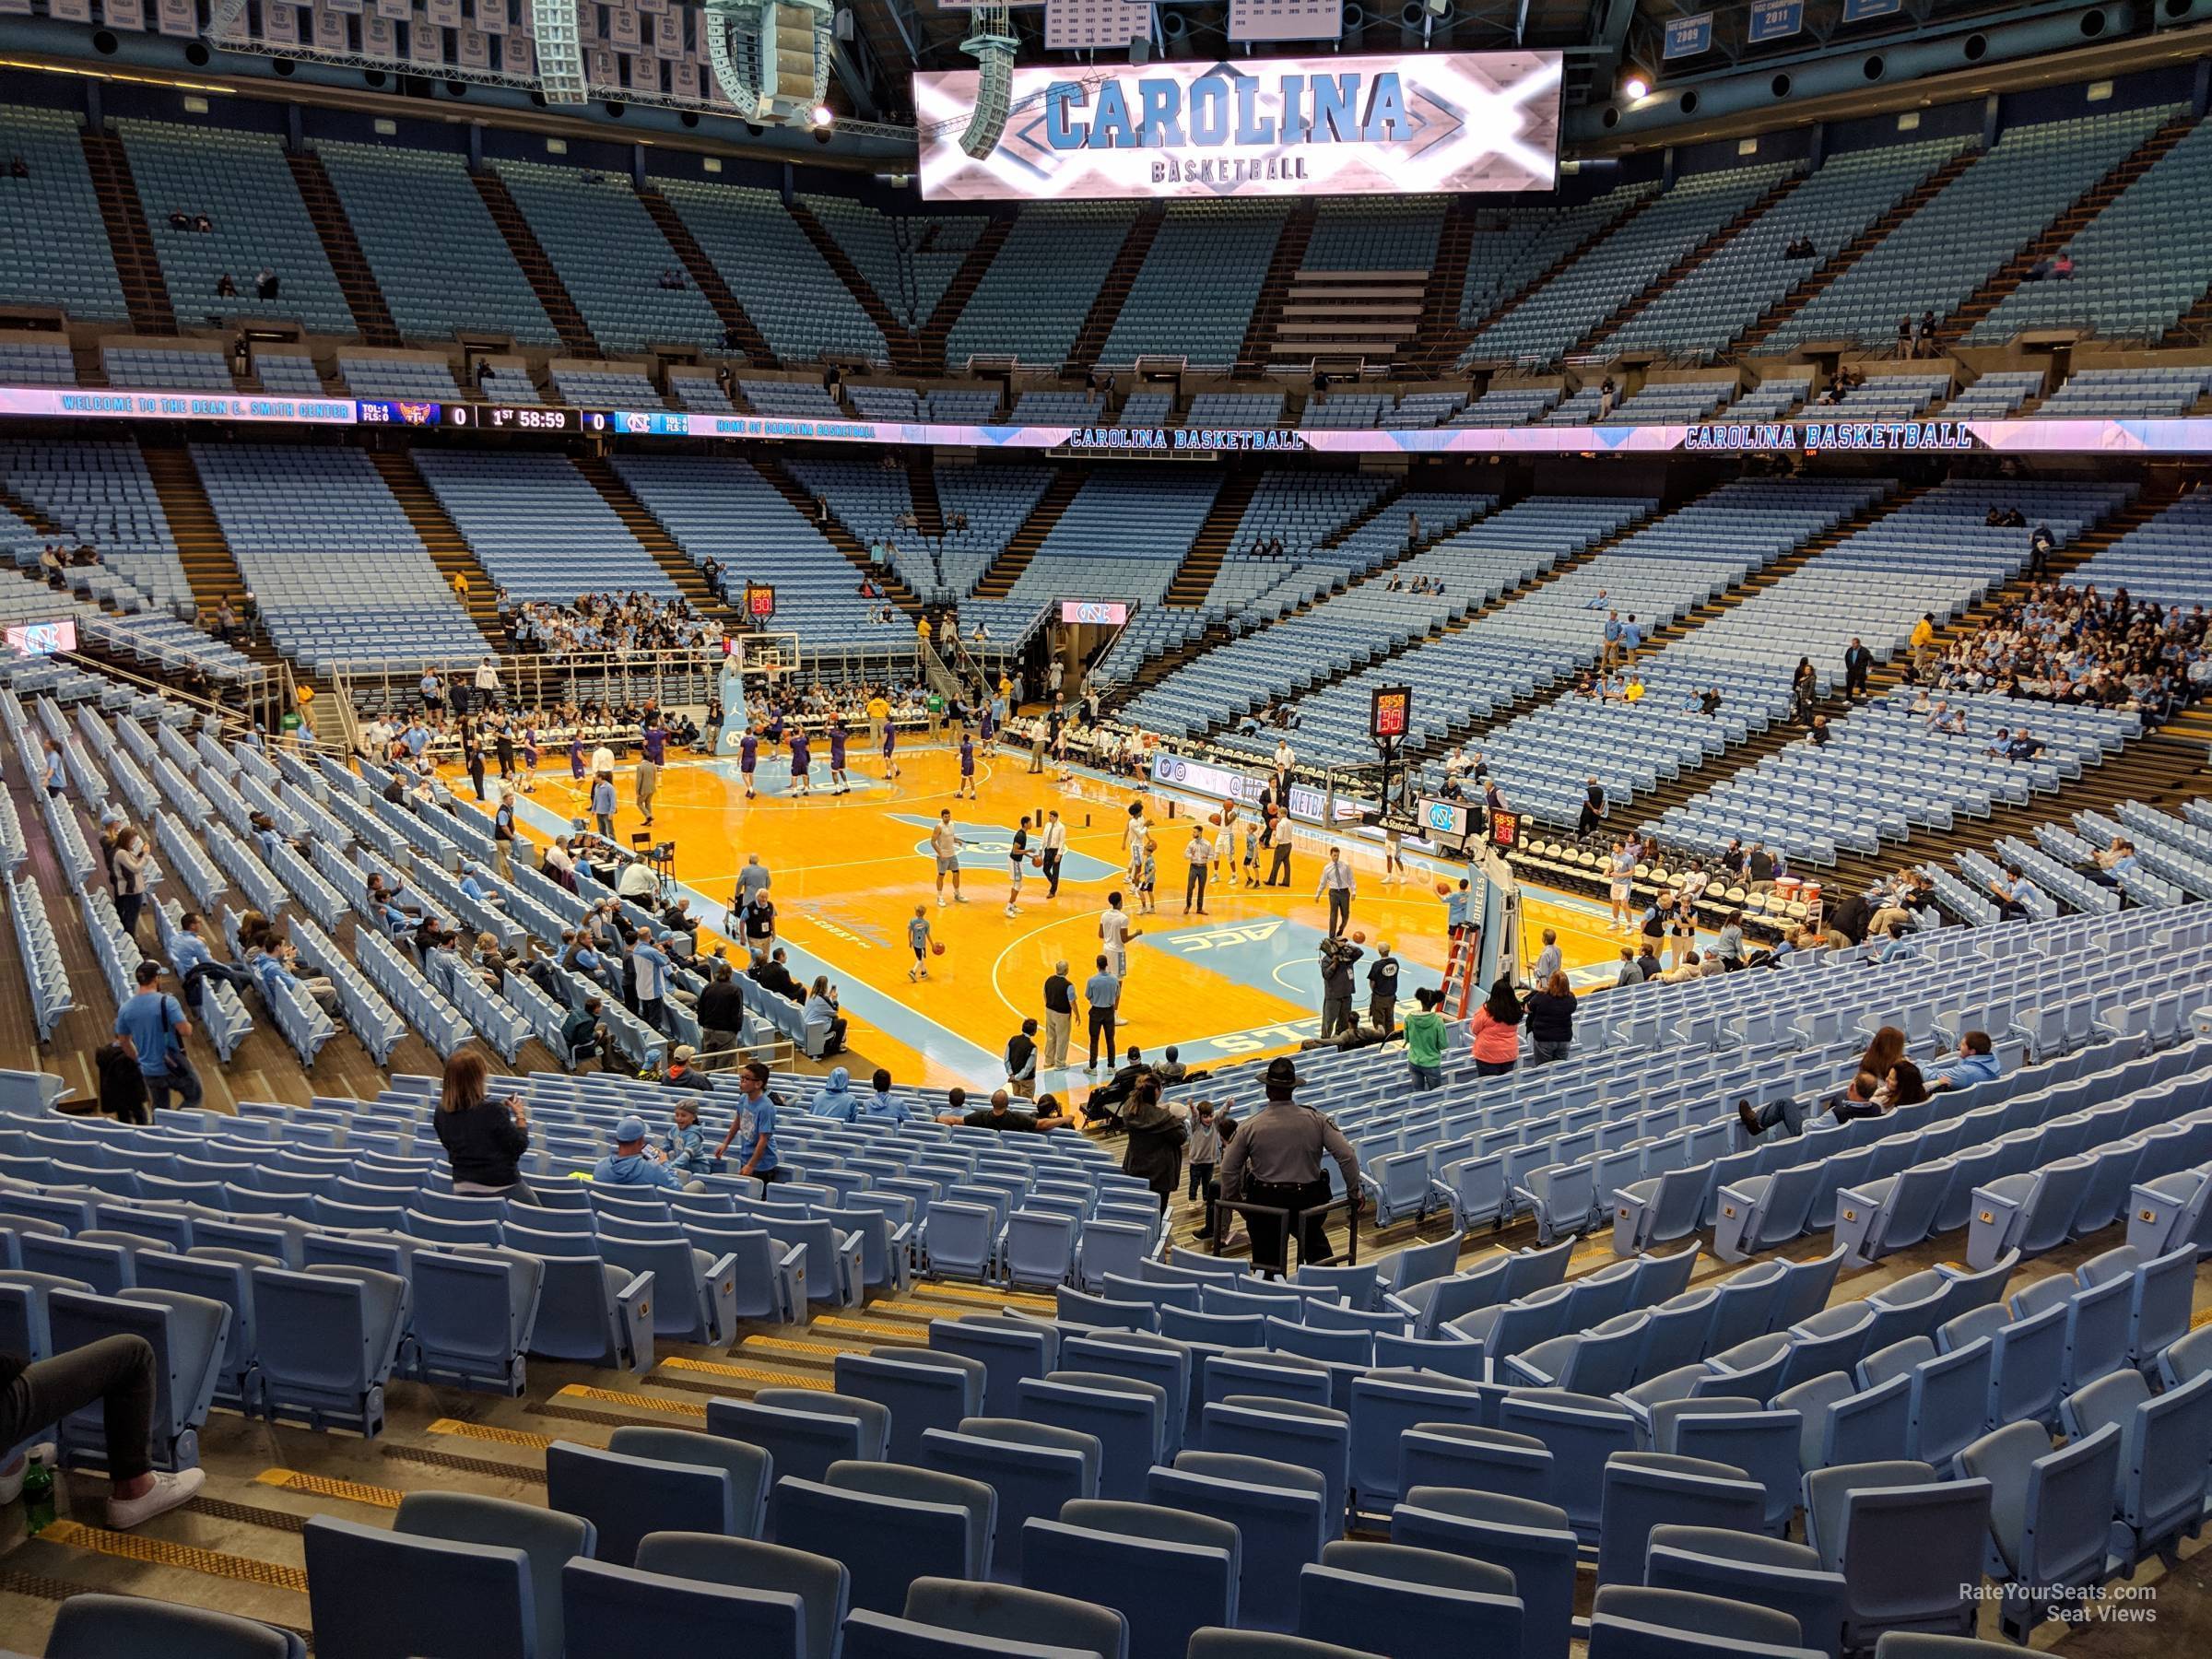 section 131, row z seat view  - dean smith center